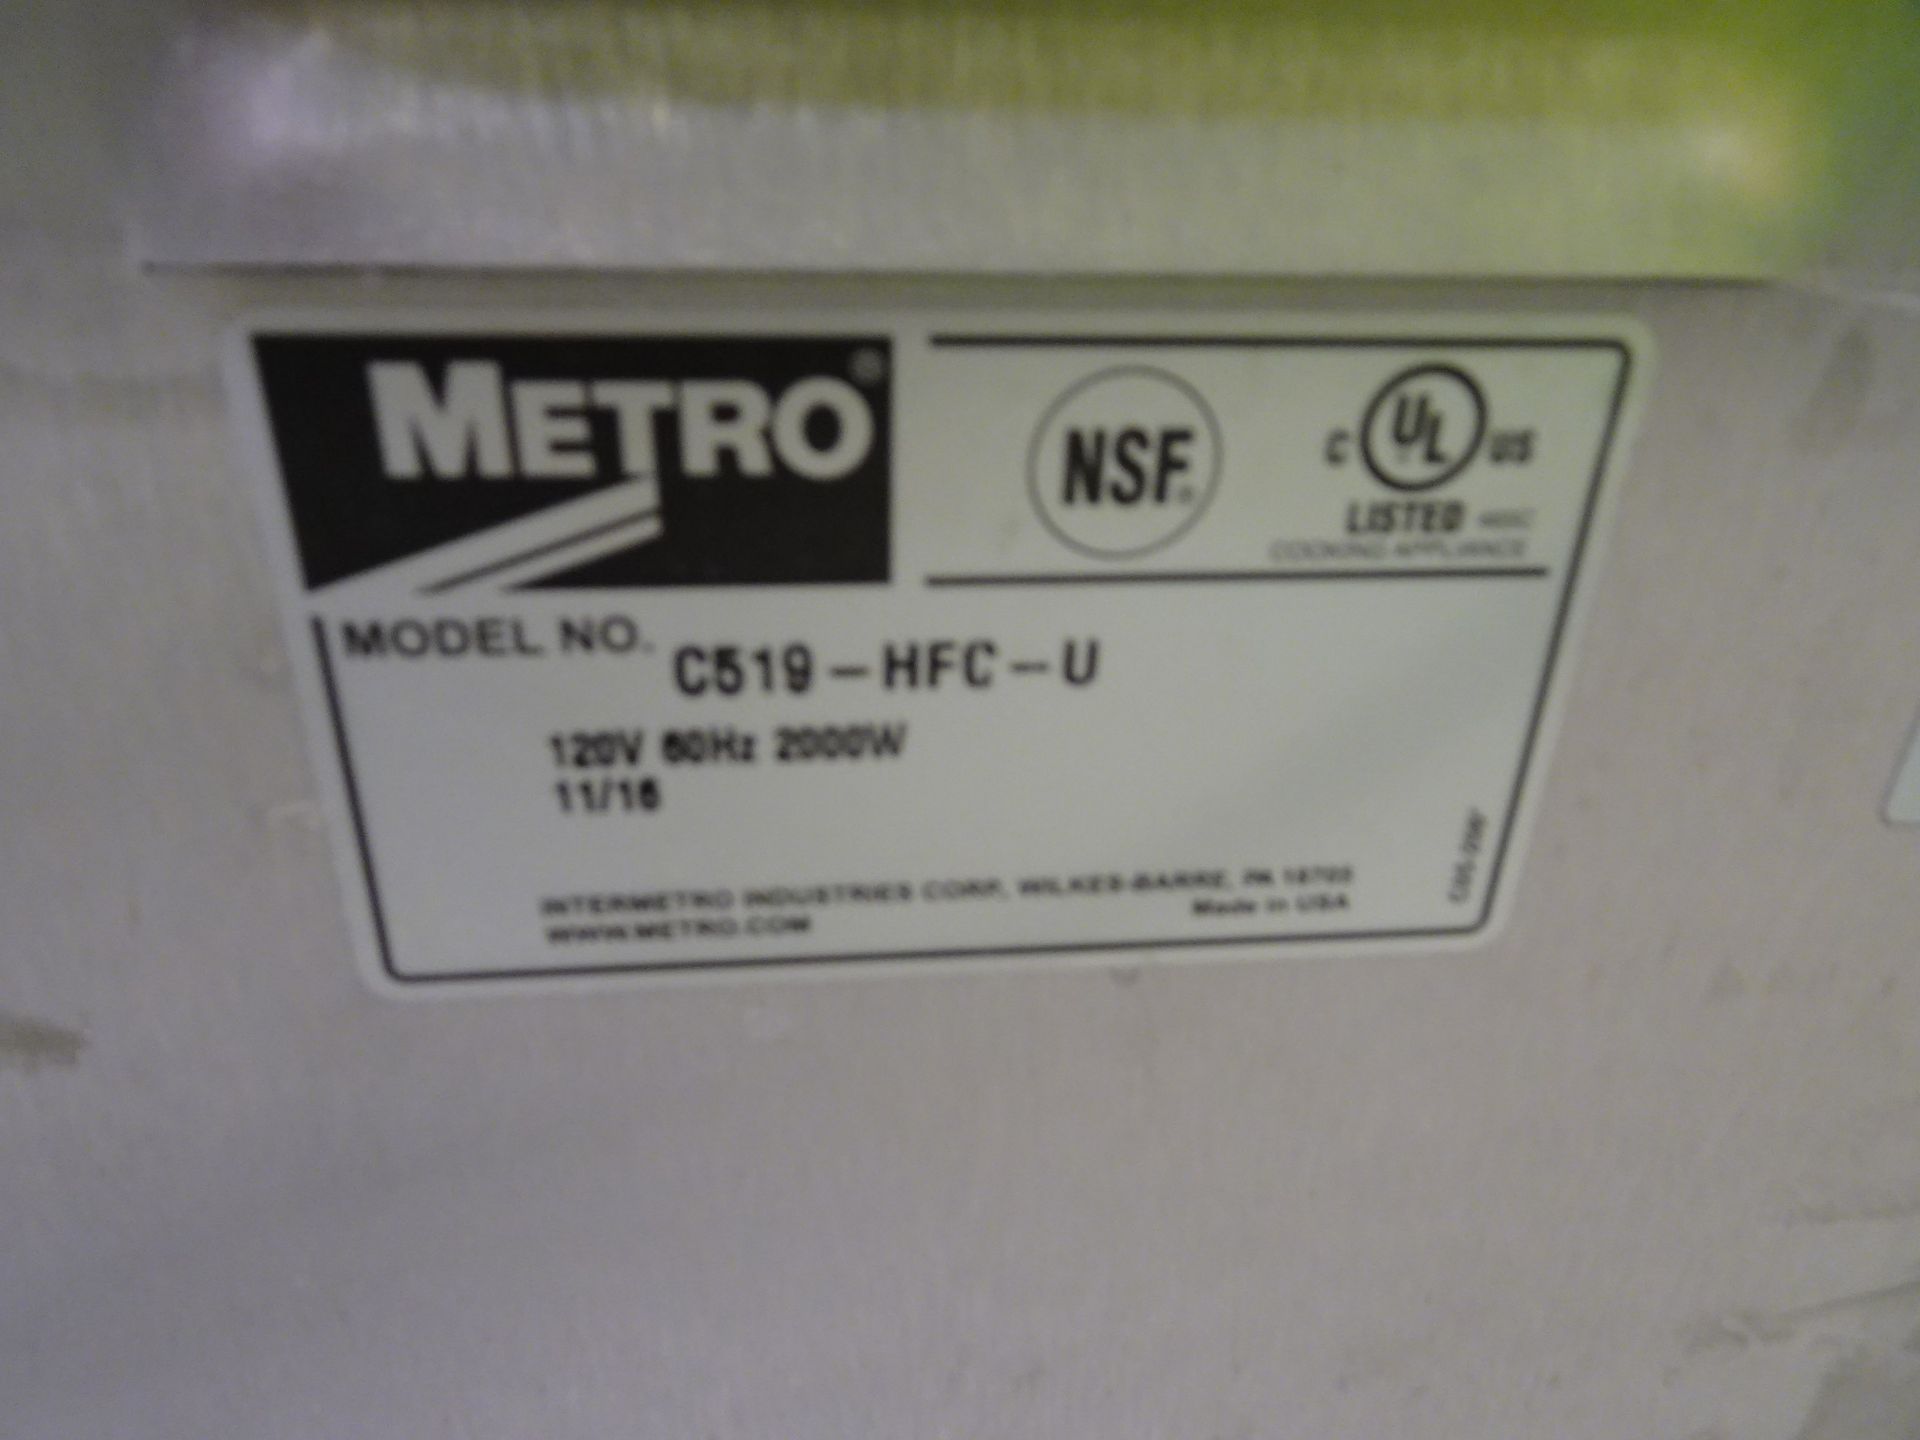 Mtero C5 series heated holding cabinet S/N: C5HME025719 - Image 9 of 9